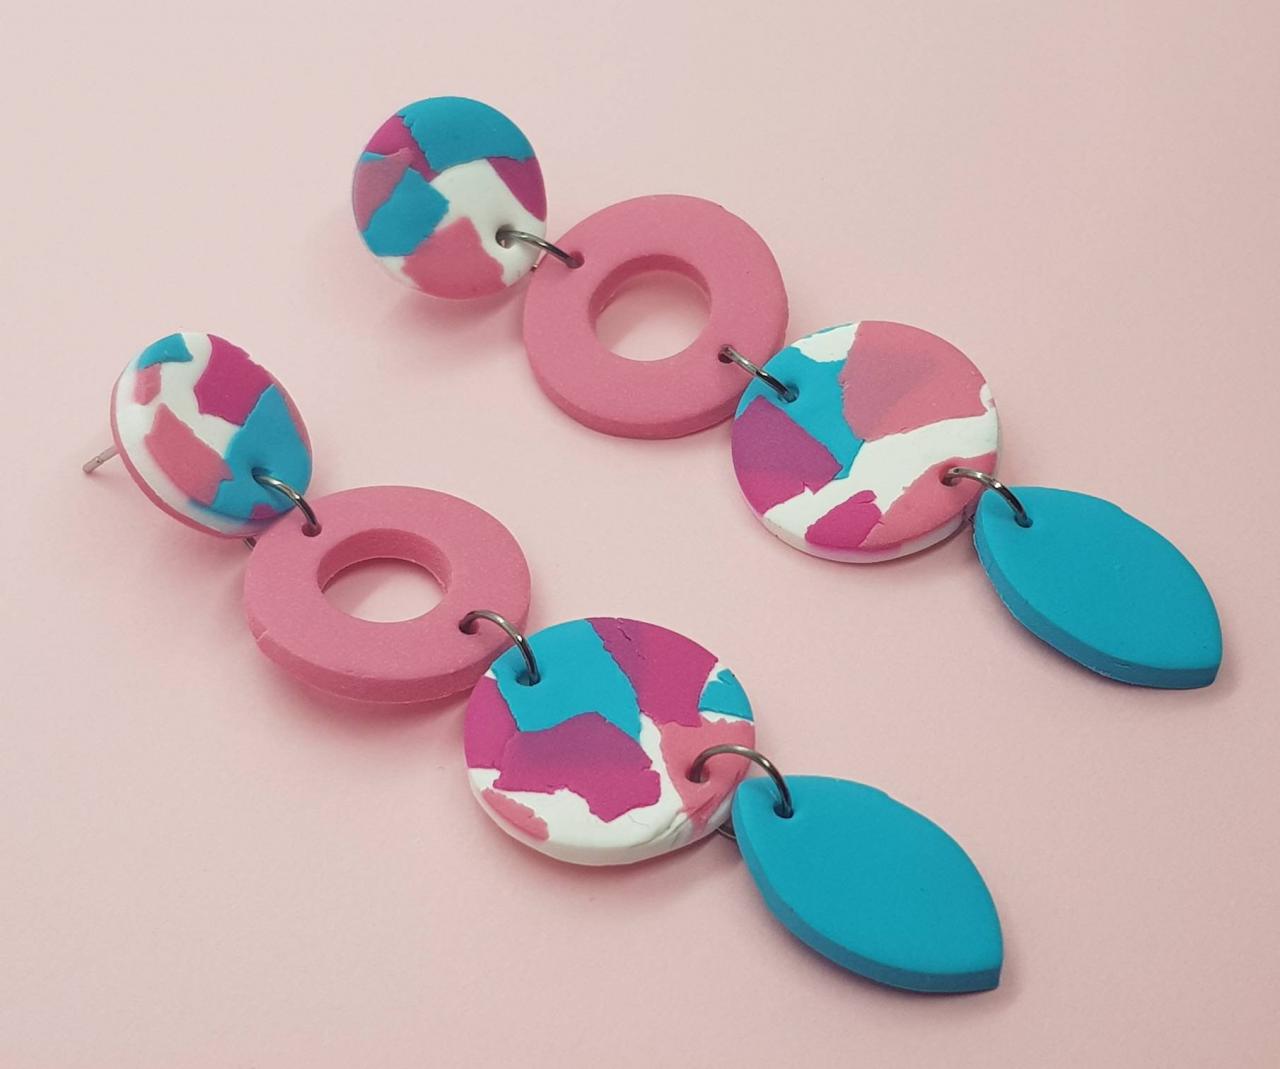 Turquoise Pink Retro Colorful Summer Polymerclay Statement Earrings Polymer Clay Orecchini Turchesi